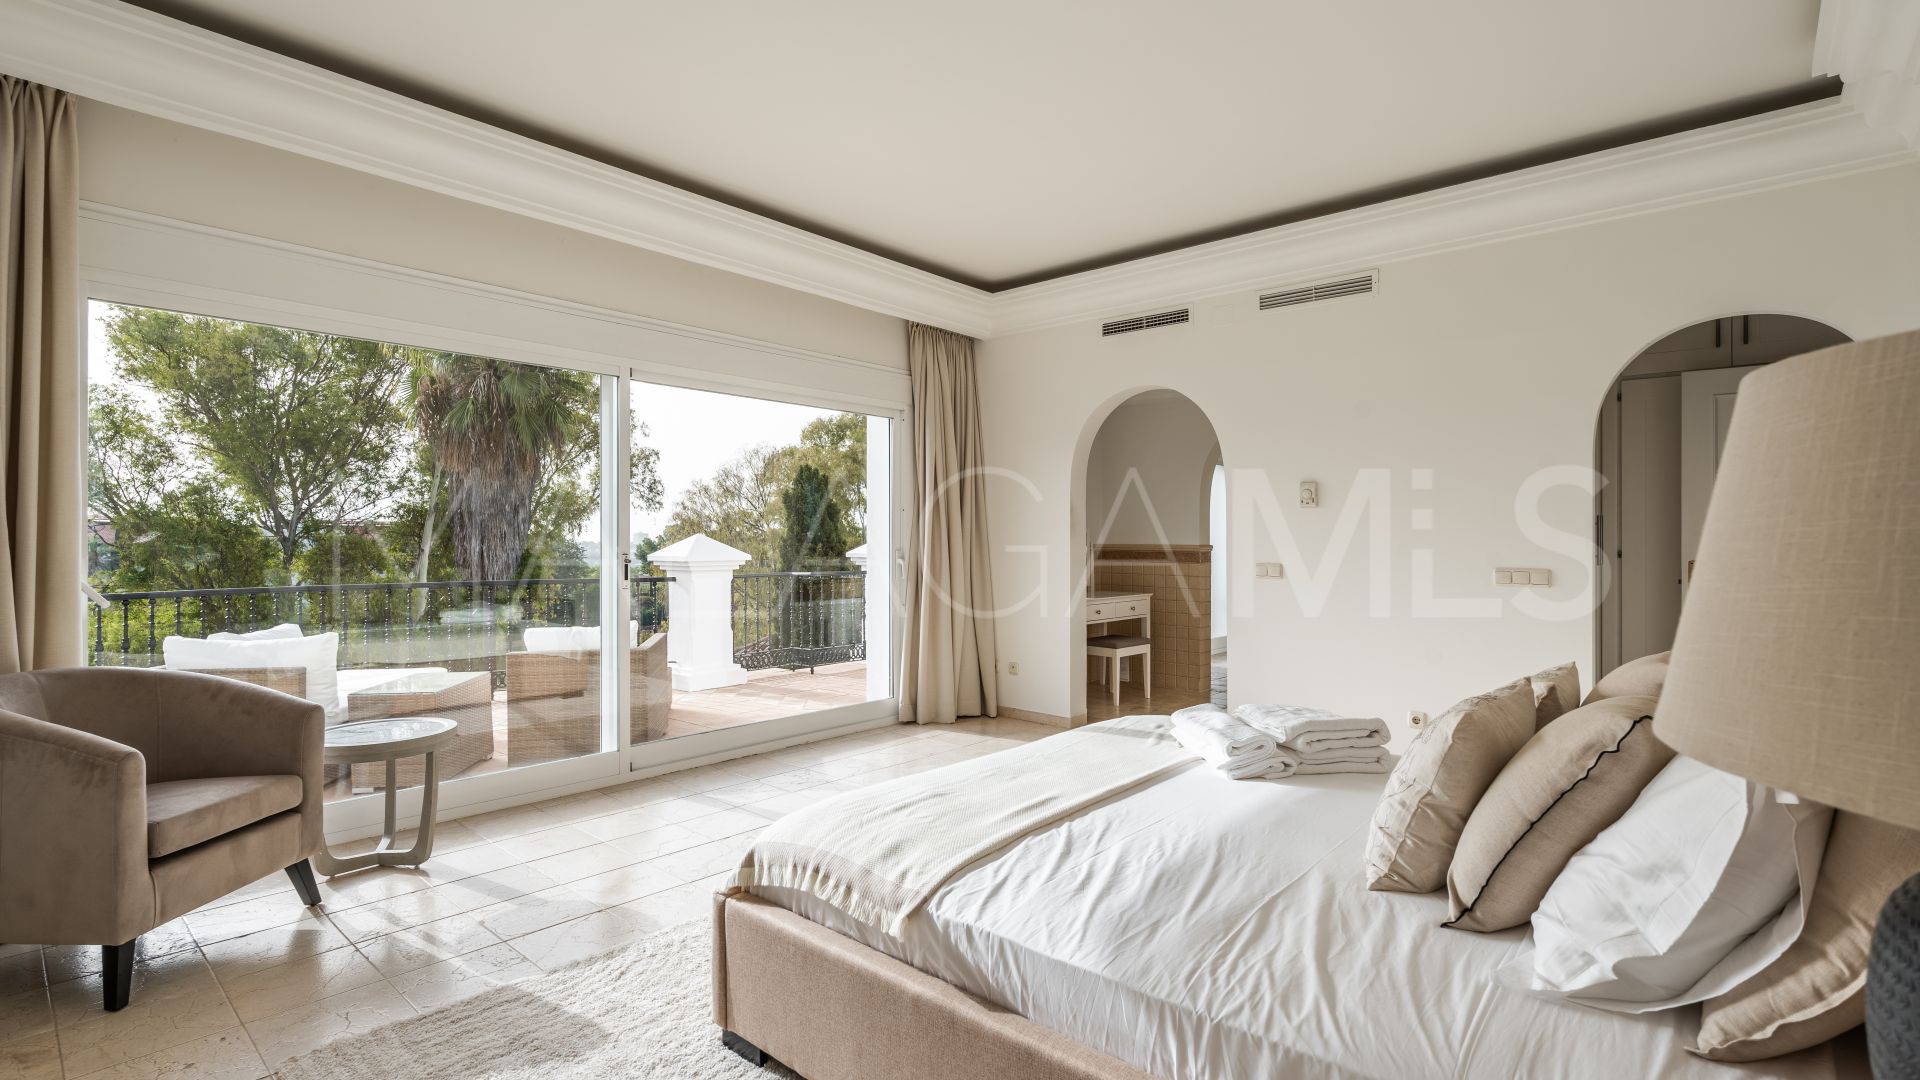 Villa for sale with 8 bedrooms in Marbella